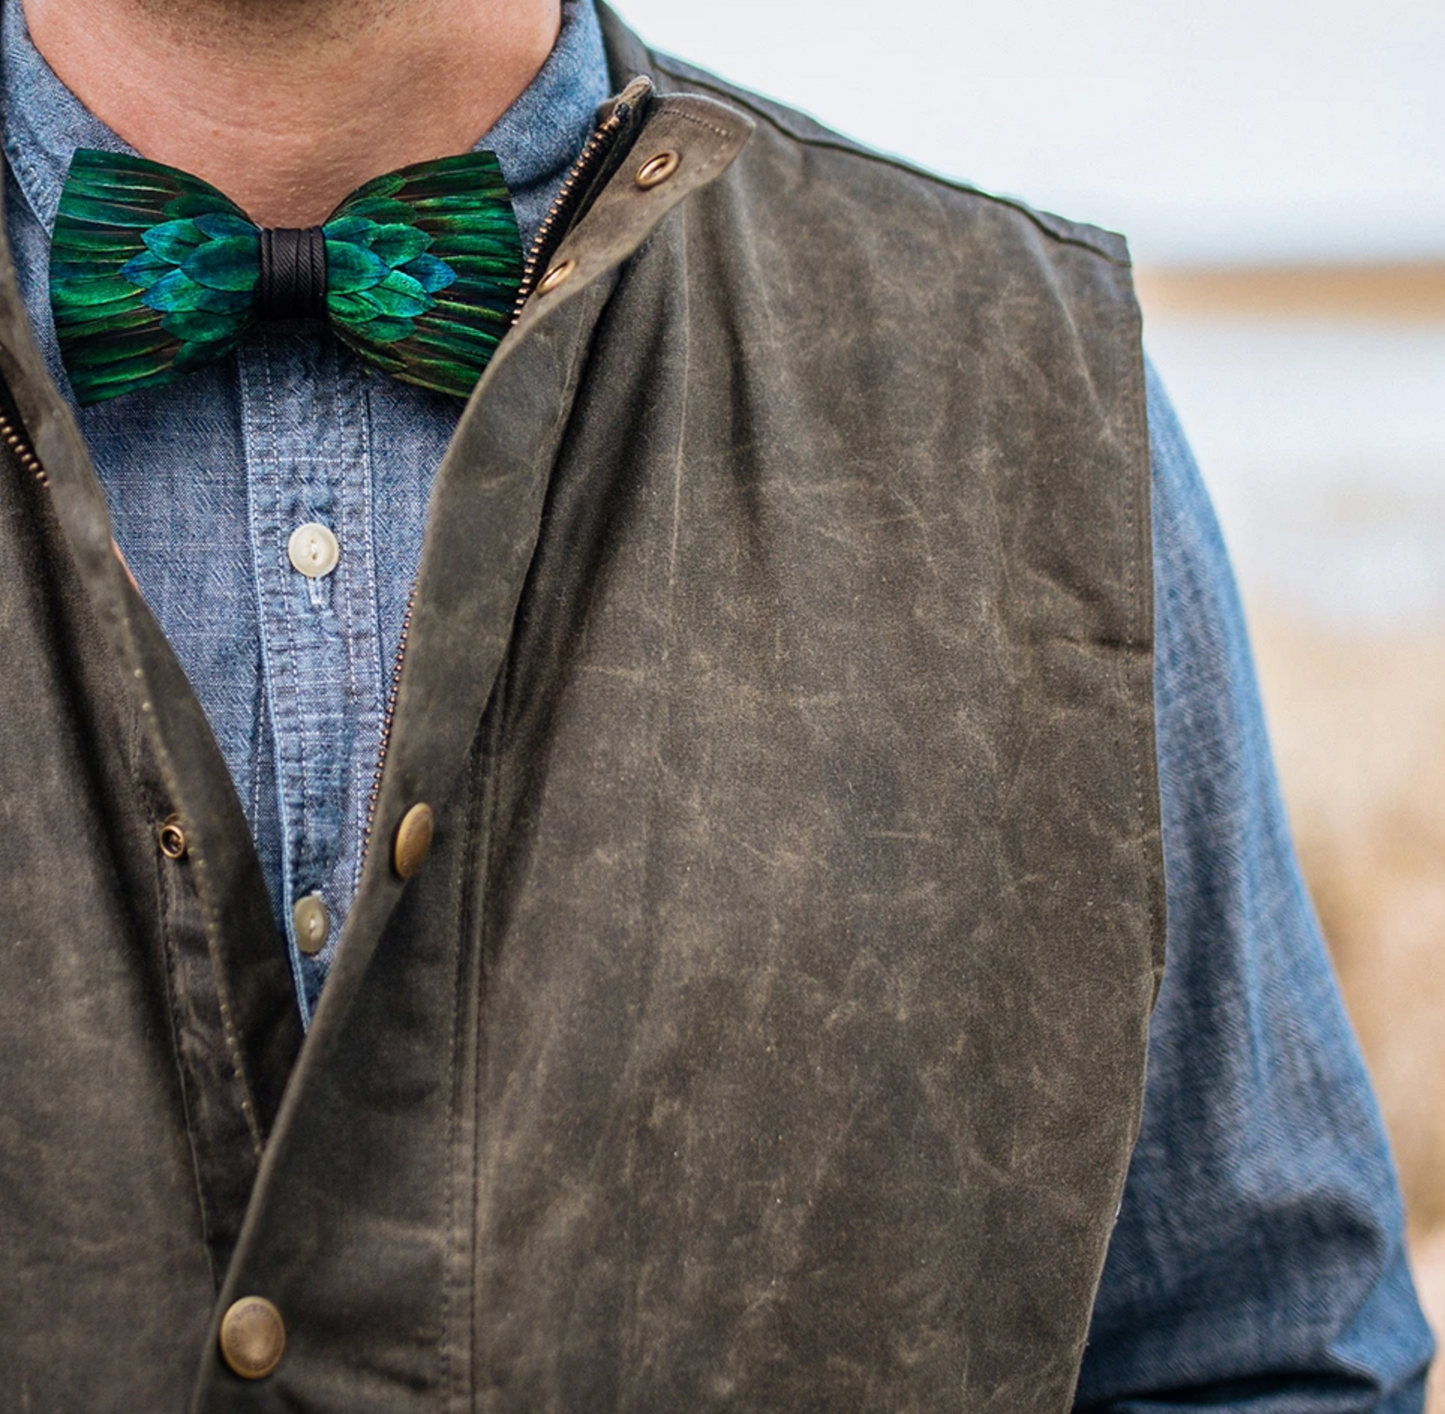 Chisolm Bow Tie